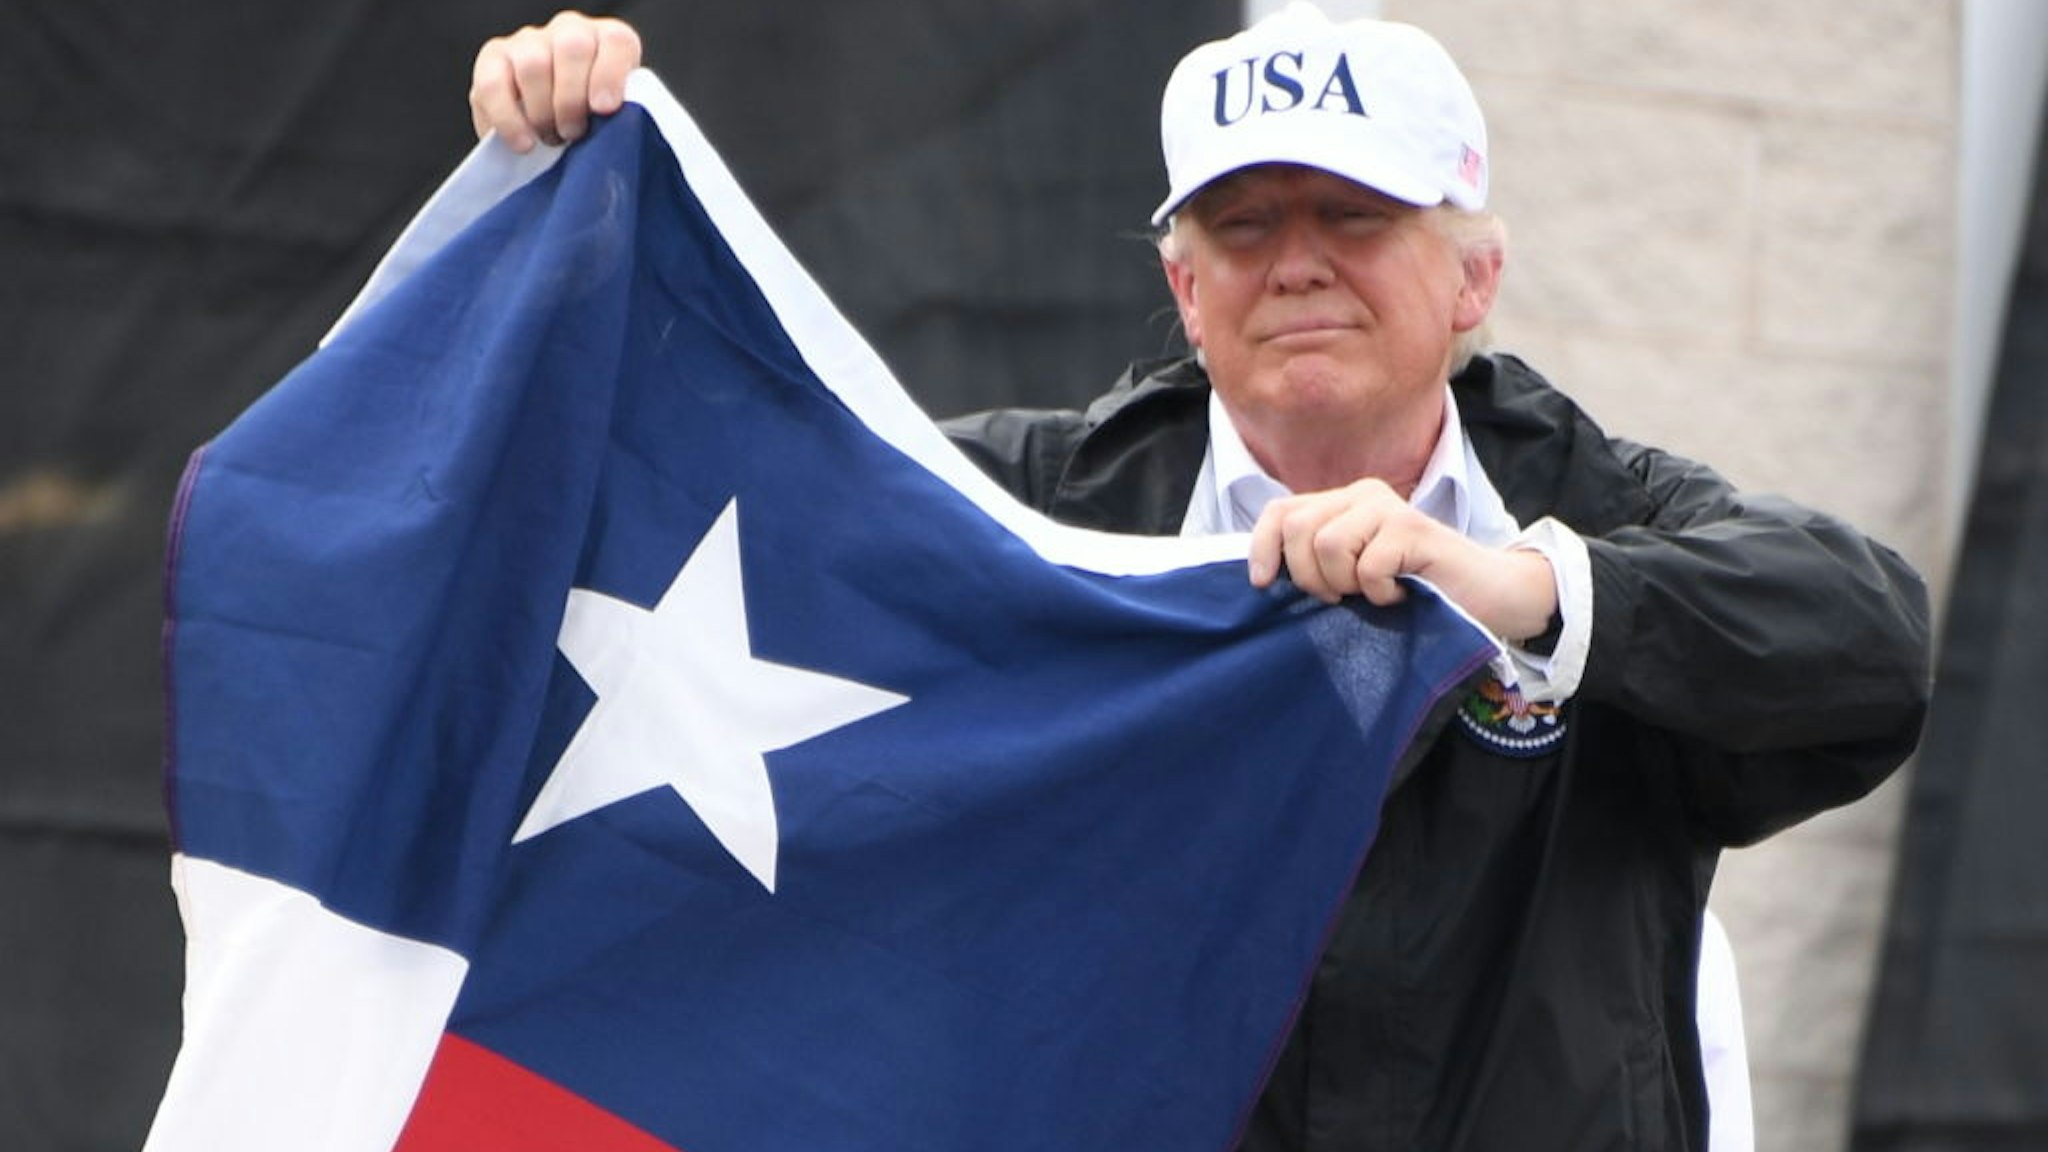 US President Donald Trump holds the state flag of Texas outside of the Annaville Fire House after attending a briefing on Hurricane Harvey in Corpus Christi, Texas on August 29, 2017.